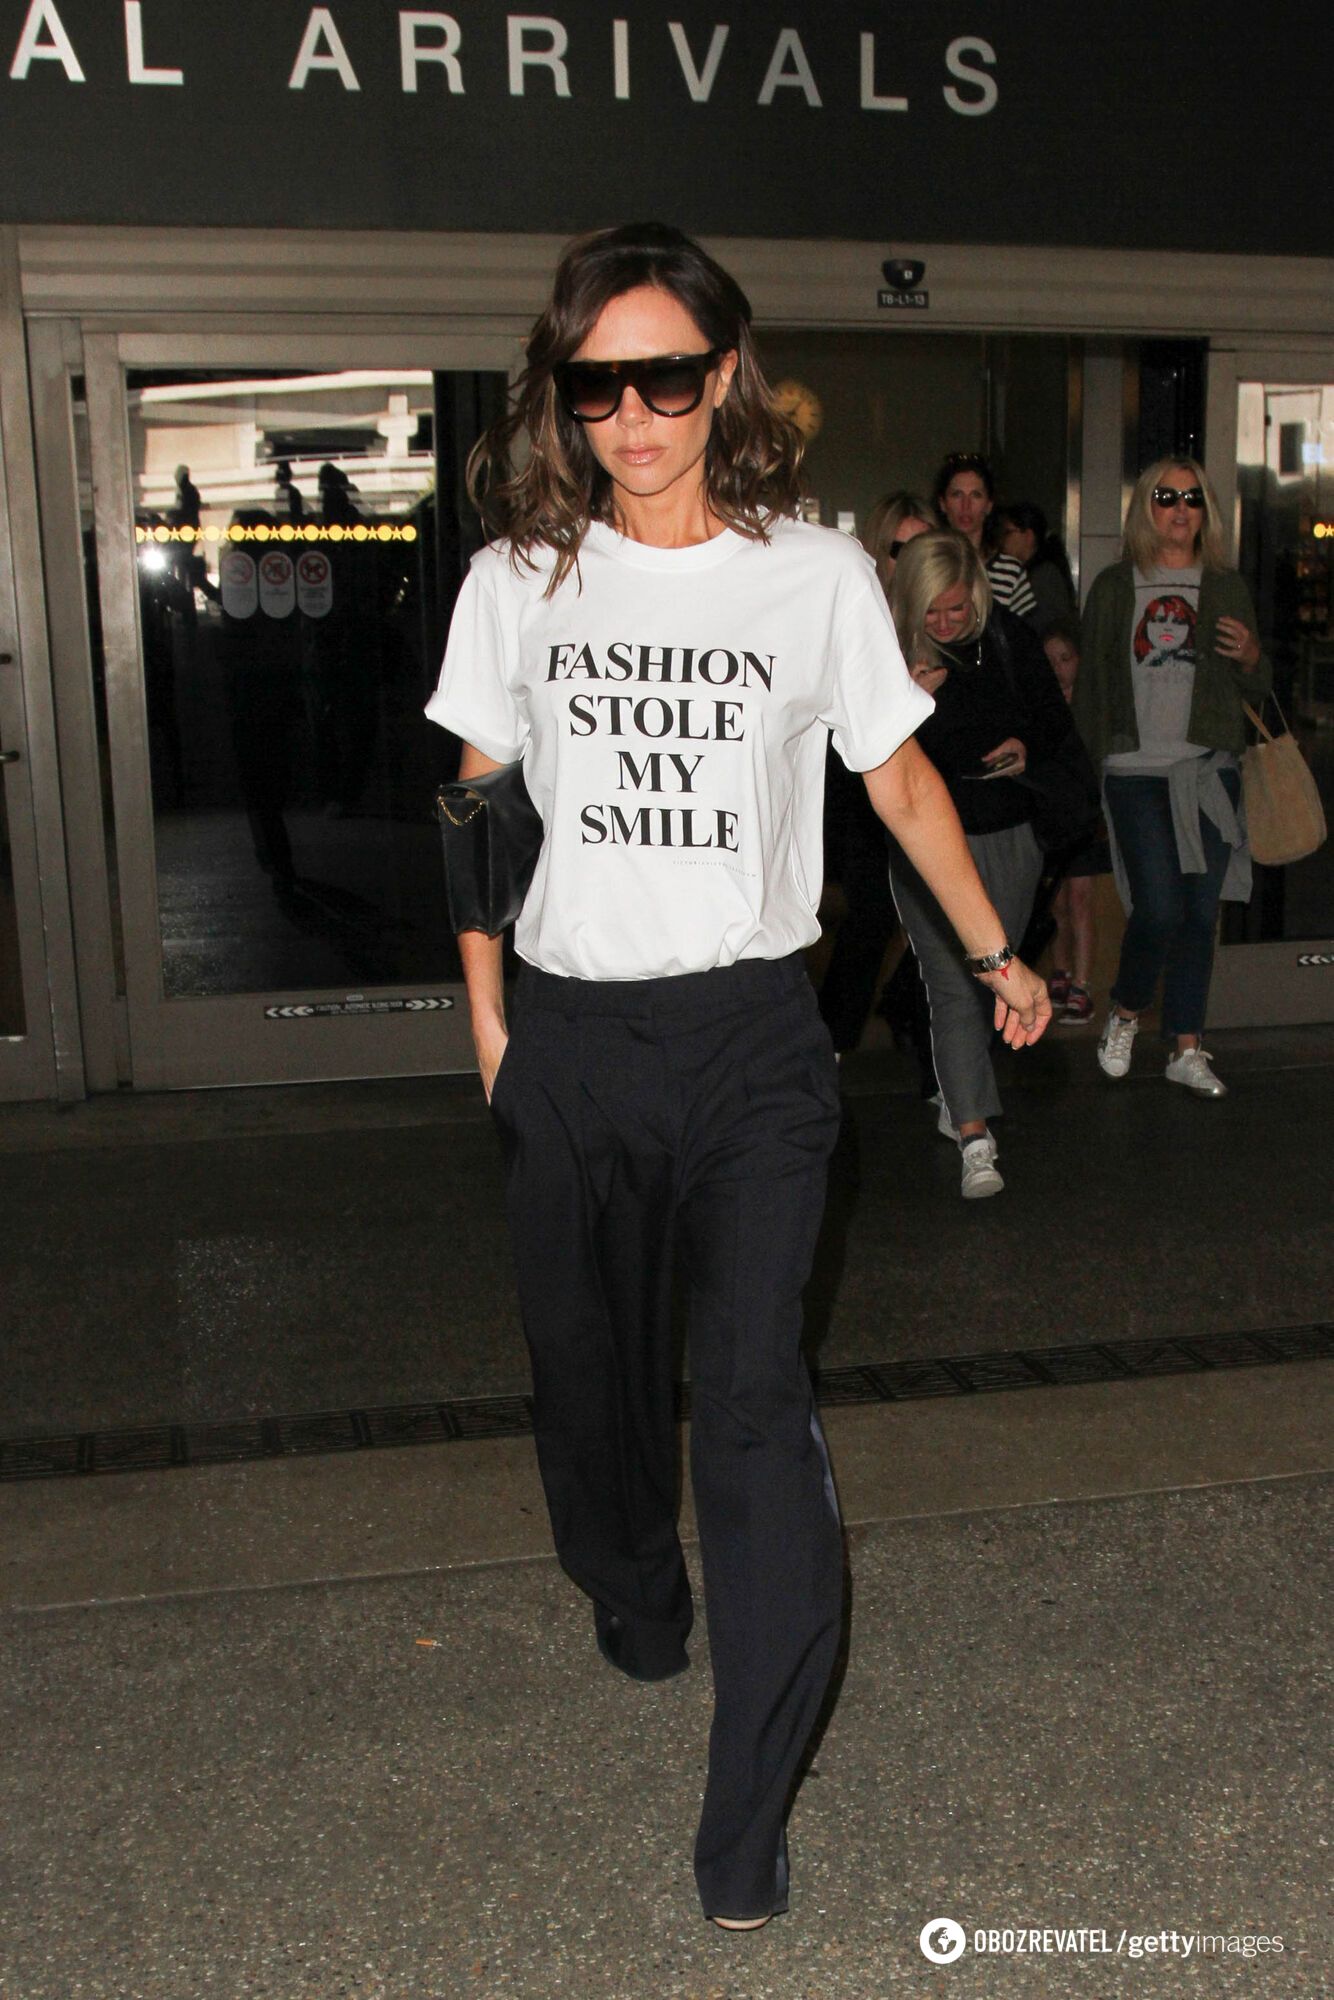 It became known why Victoria Beckham almost never smiles in photos